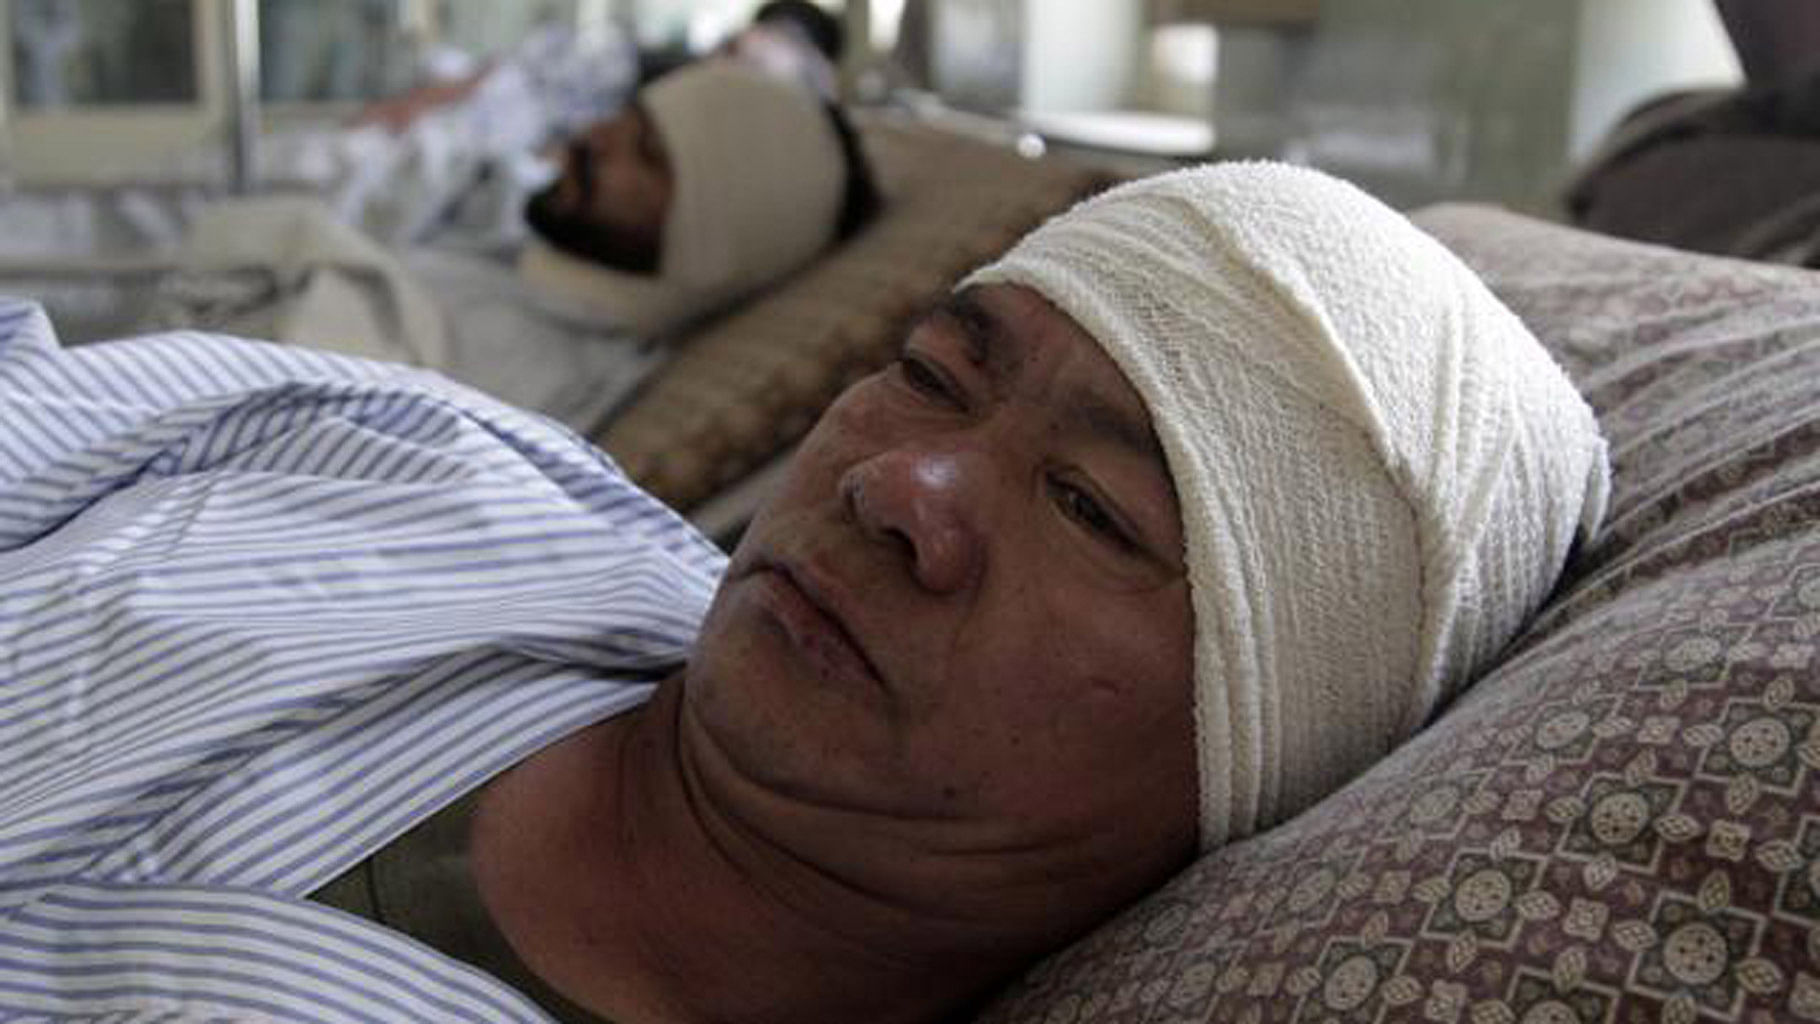 A Nepalese security guard receives treatment at a hospital in Kabul on 20 June. (Photo: AP)